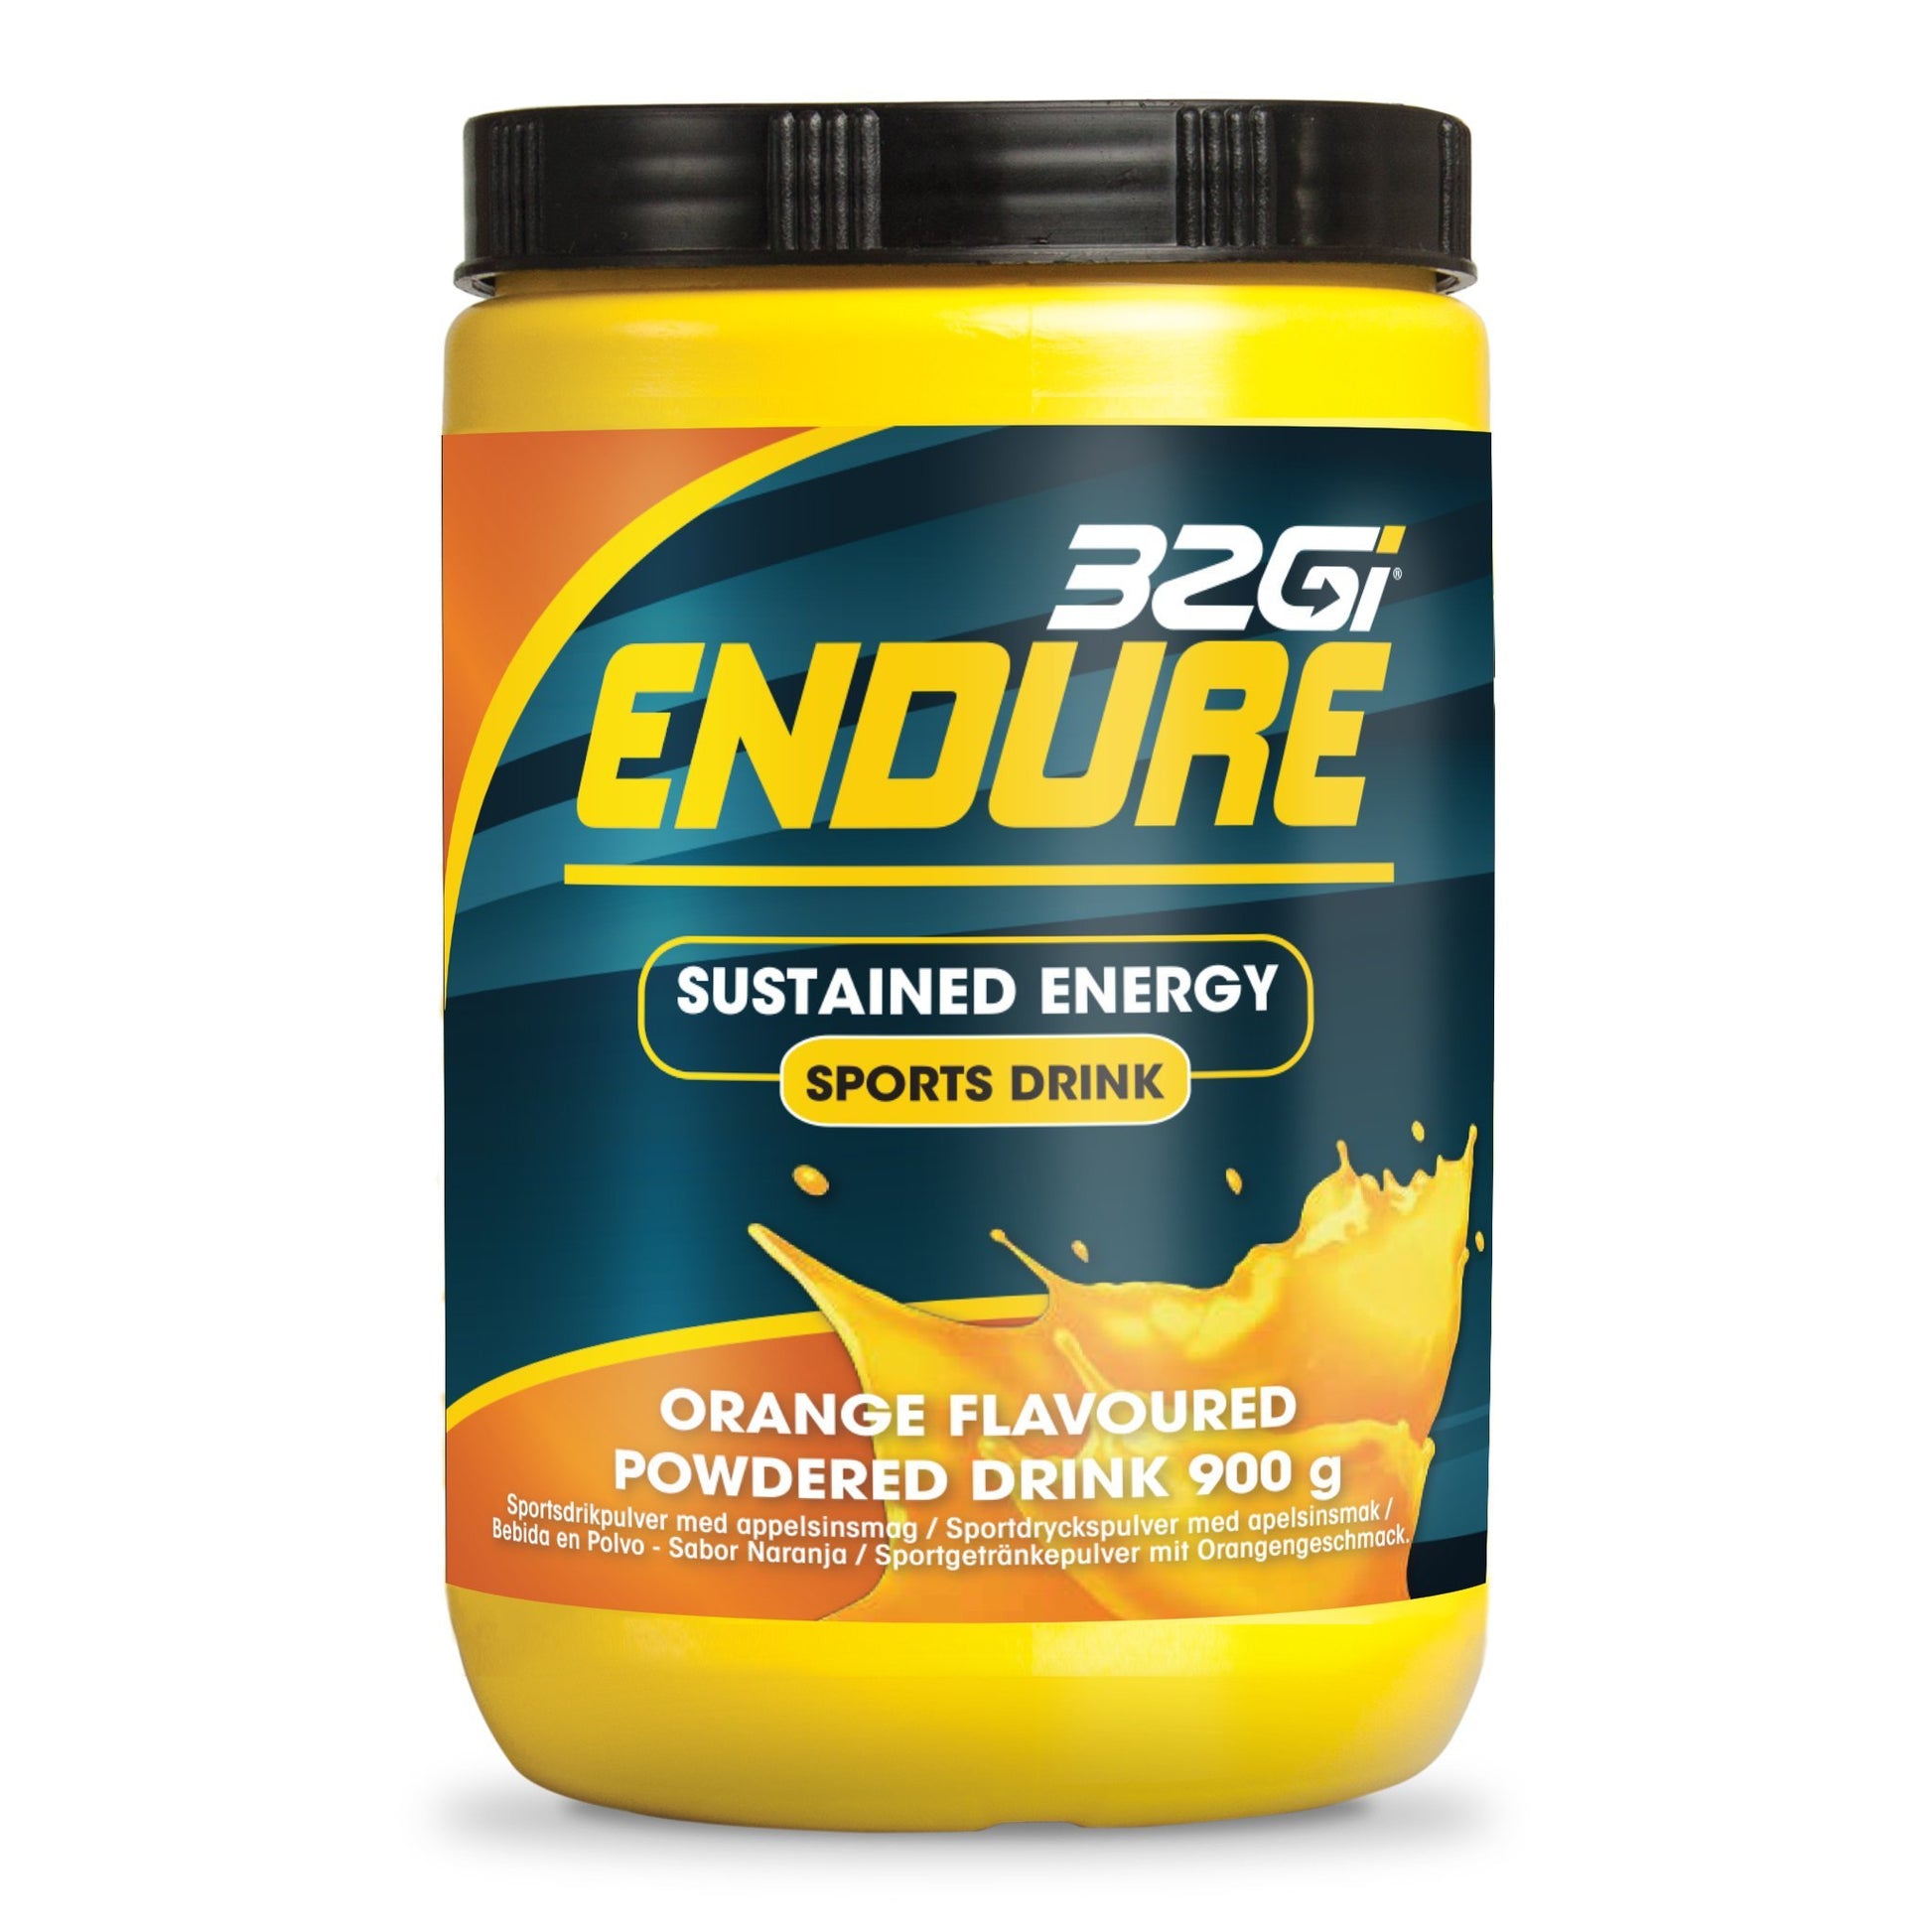 Endure Sports Drink - Sustained Energy – 32Gi South Africa